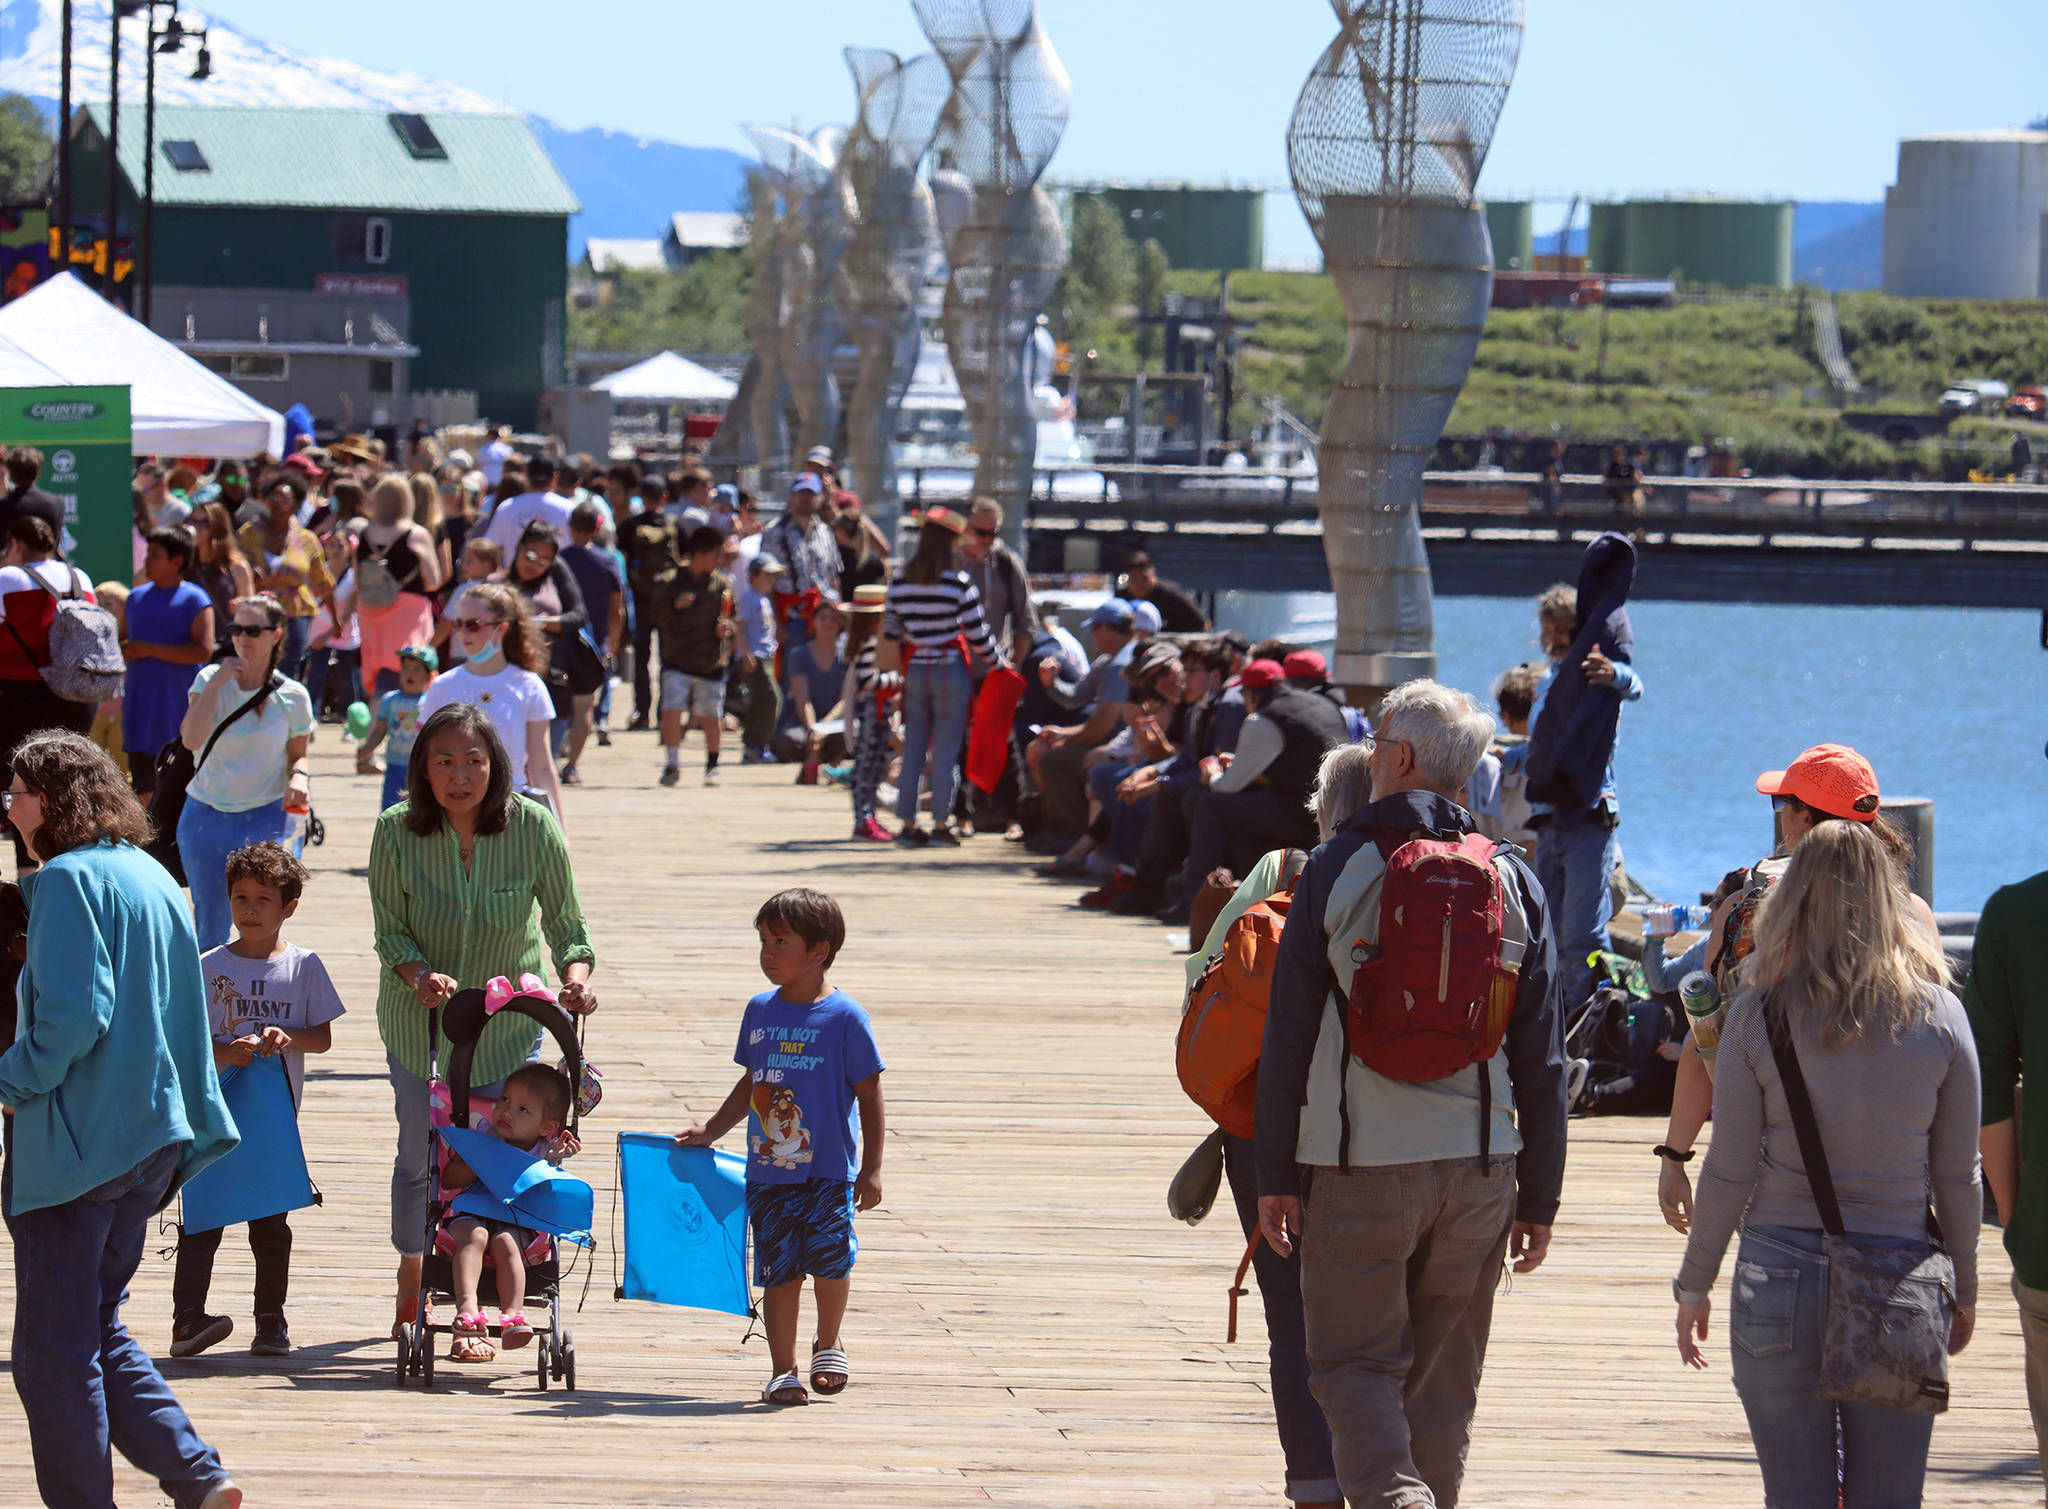 Based on the attendance of past festivals, organizers of the 11th Juneau Maritime Festival estimated in excess of 5,000 people showed up for the event celebrating Juneau’s maritime culture. (Ben Hohenstatt / Juneau Empire)